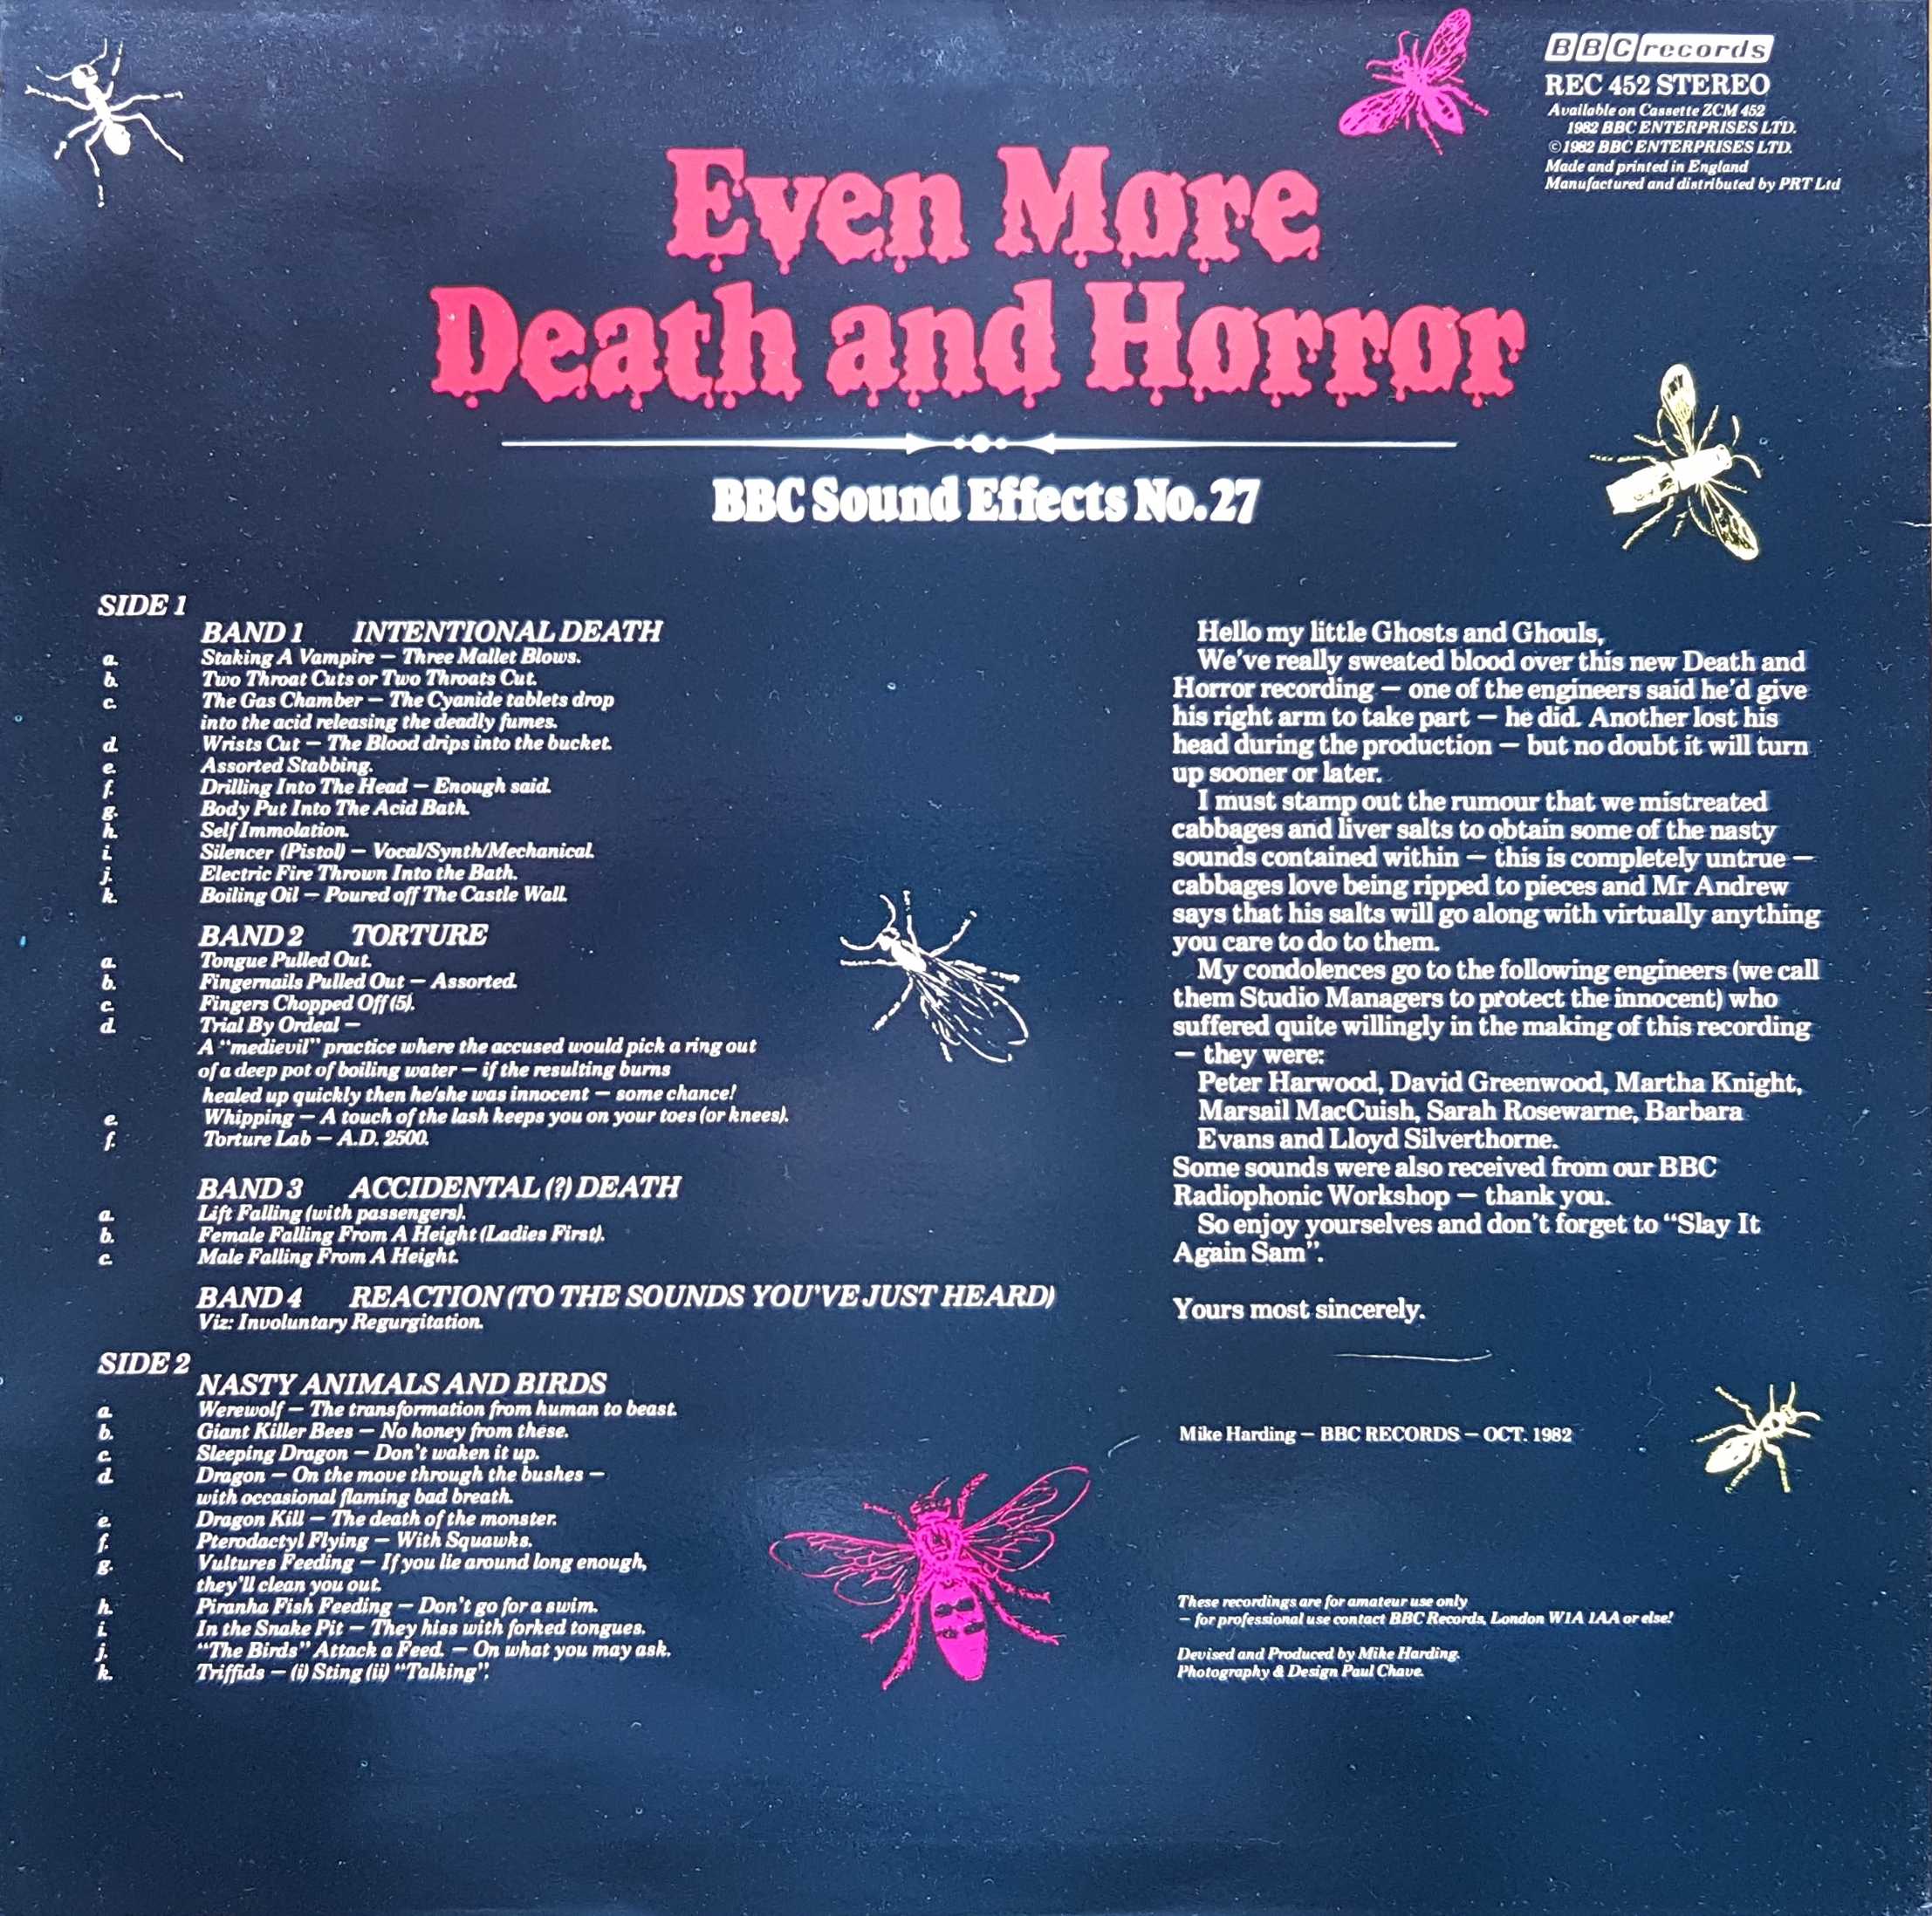 Picture of REC 452 Even more death and horror by artist Various from the BBC records and Tapes library